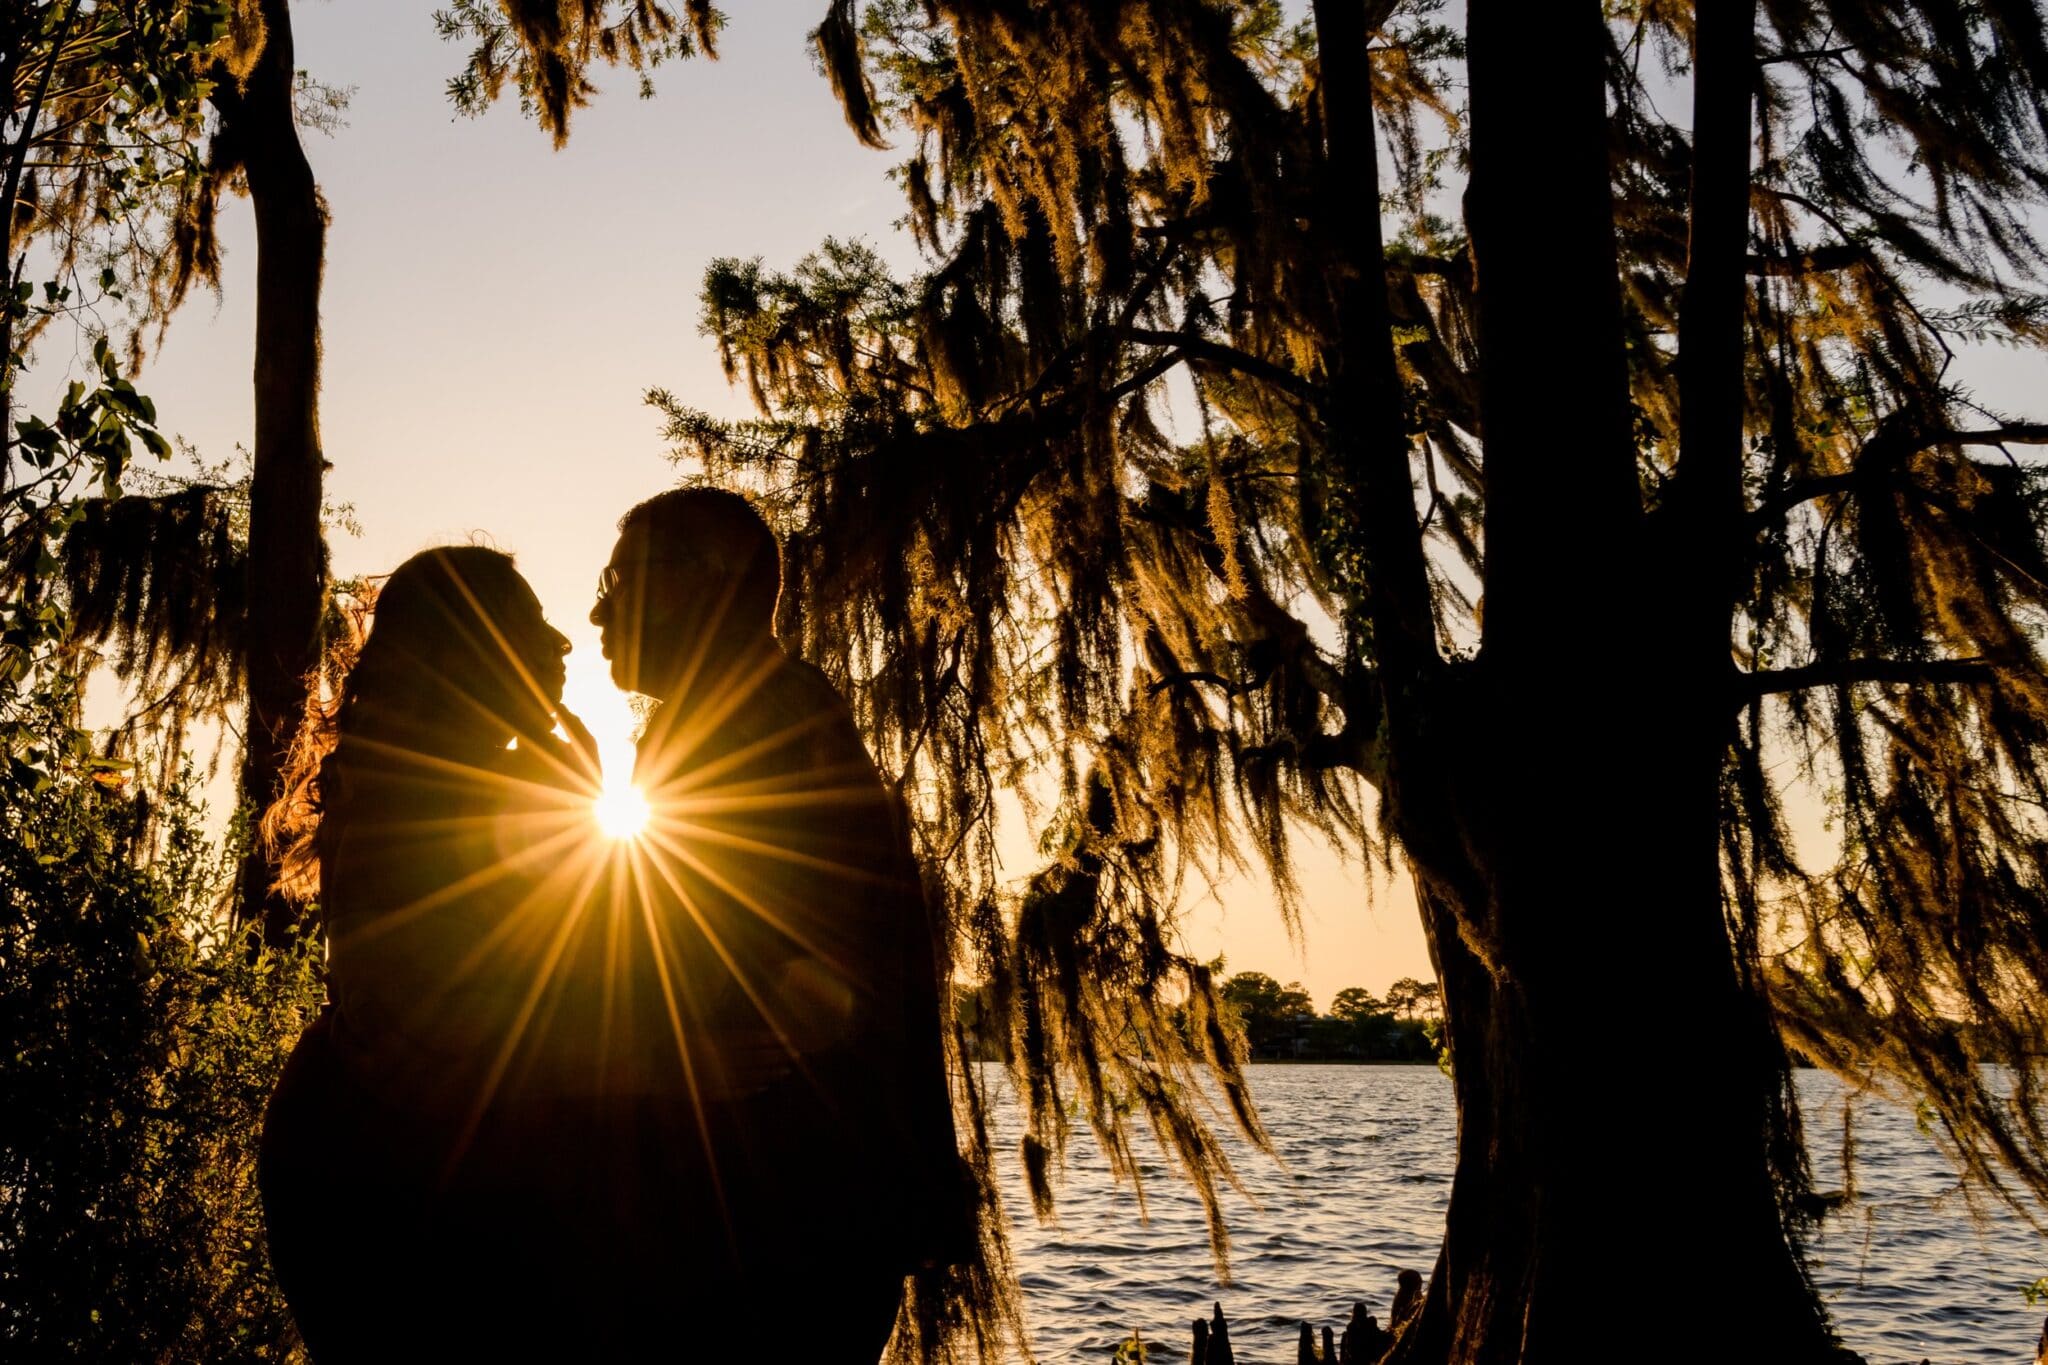 couple silhouetted at sunset by the lake with trees and Spanish moss